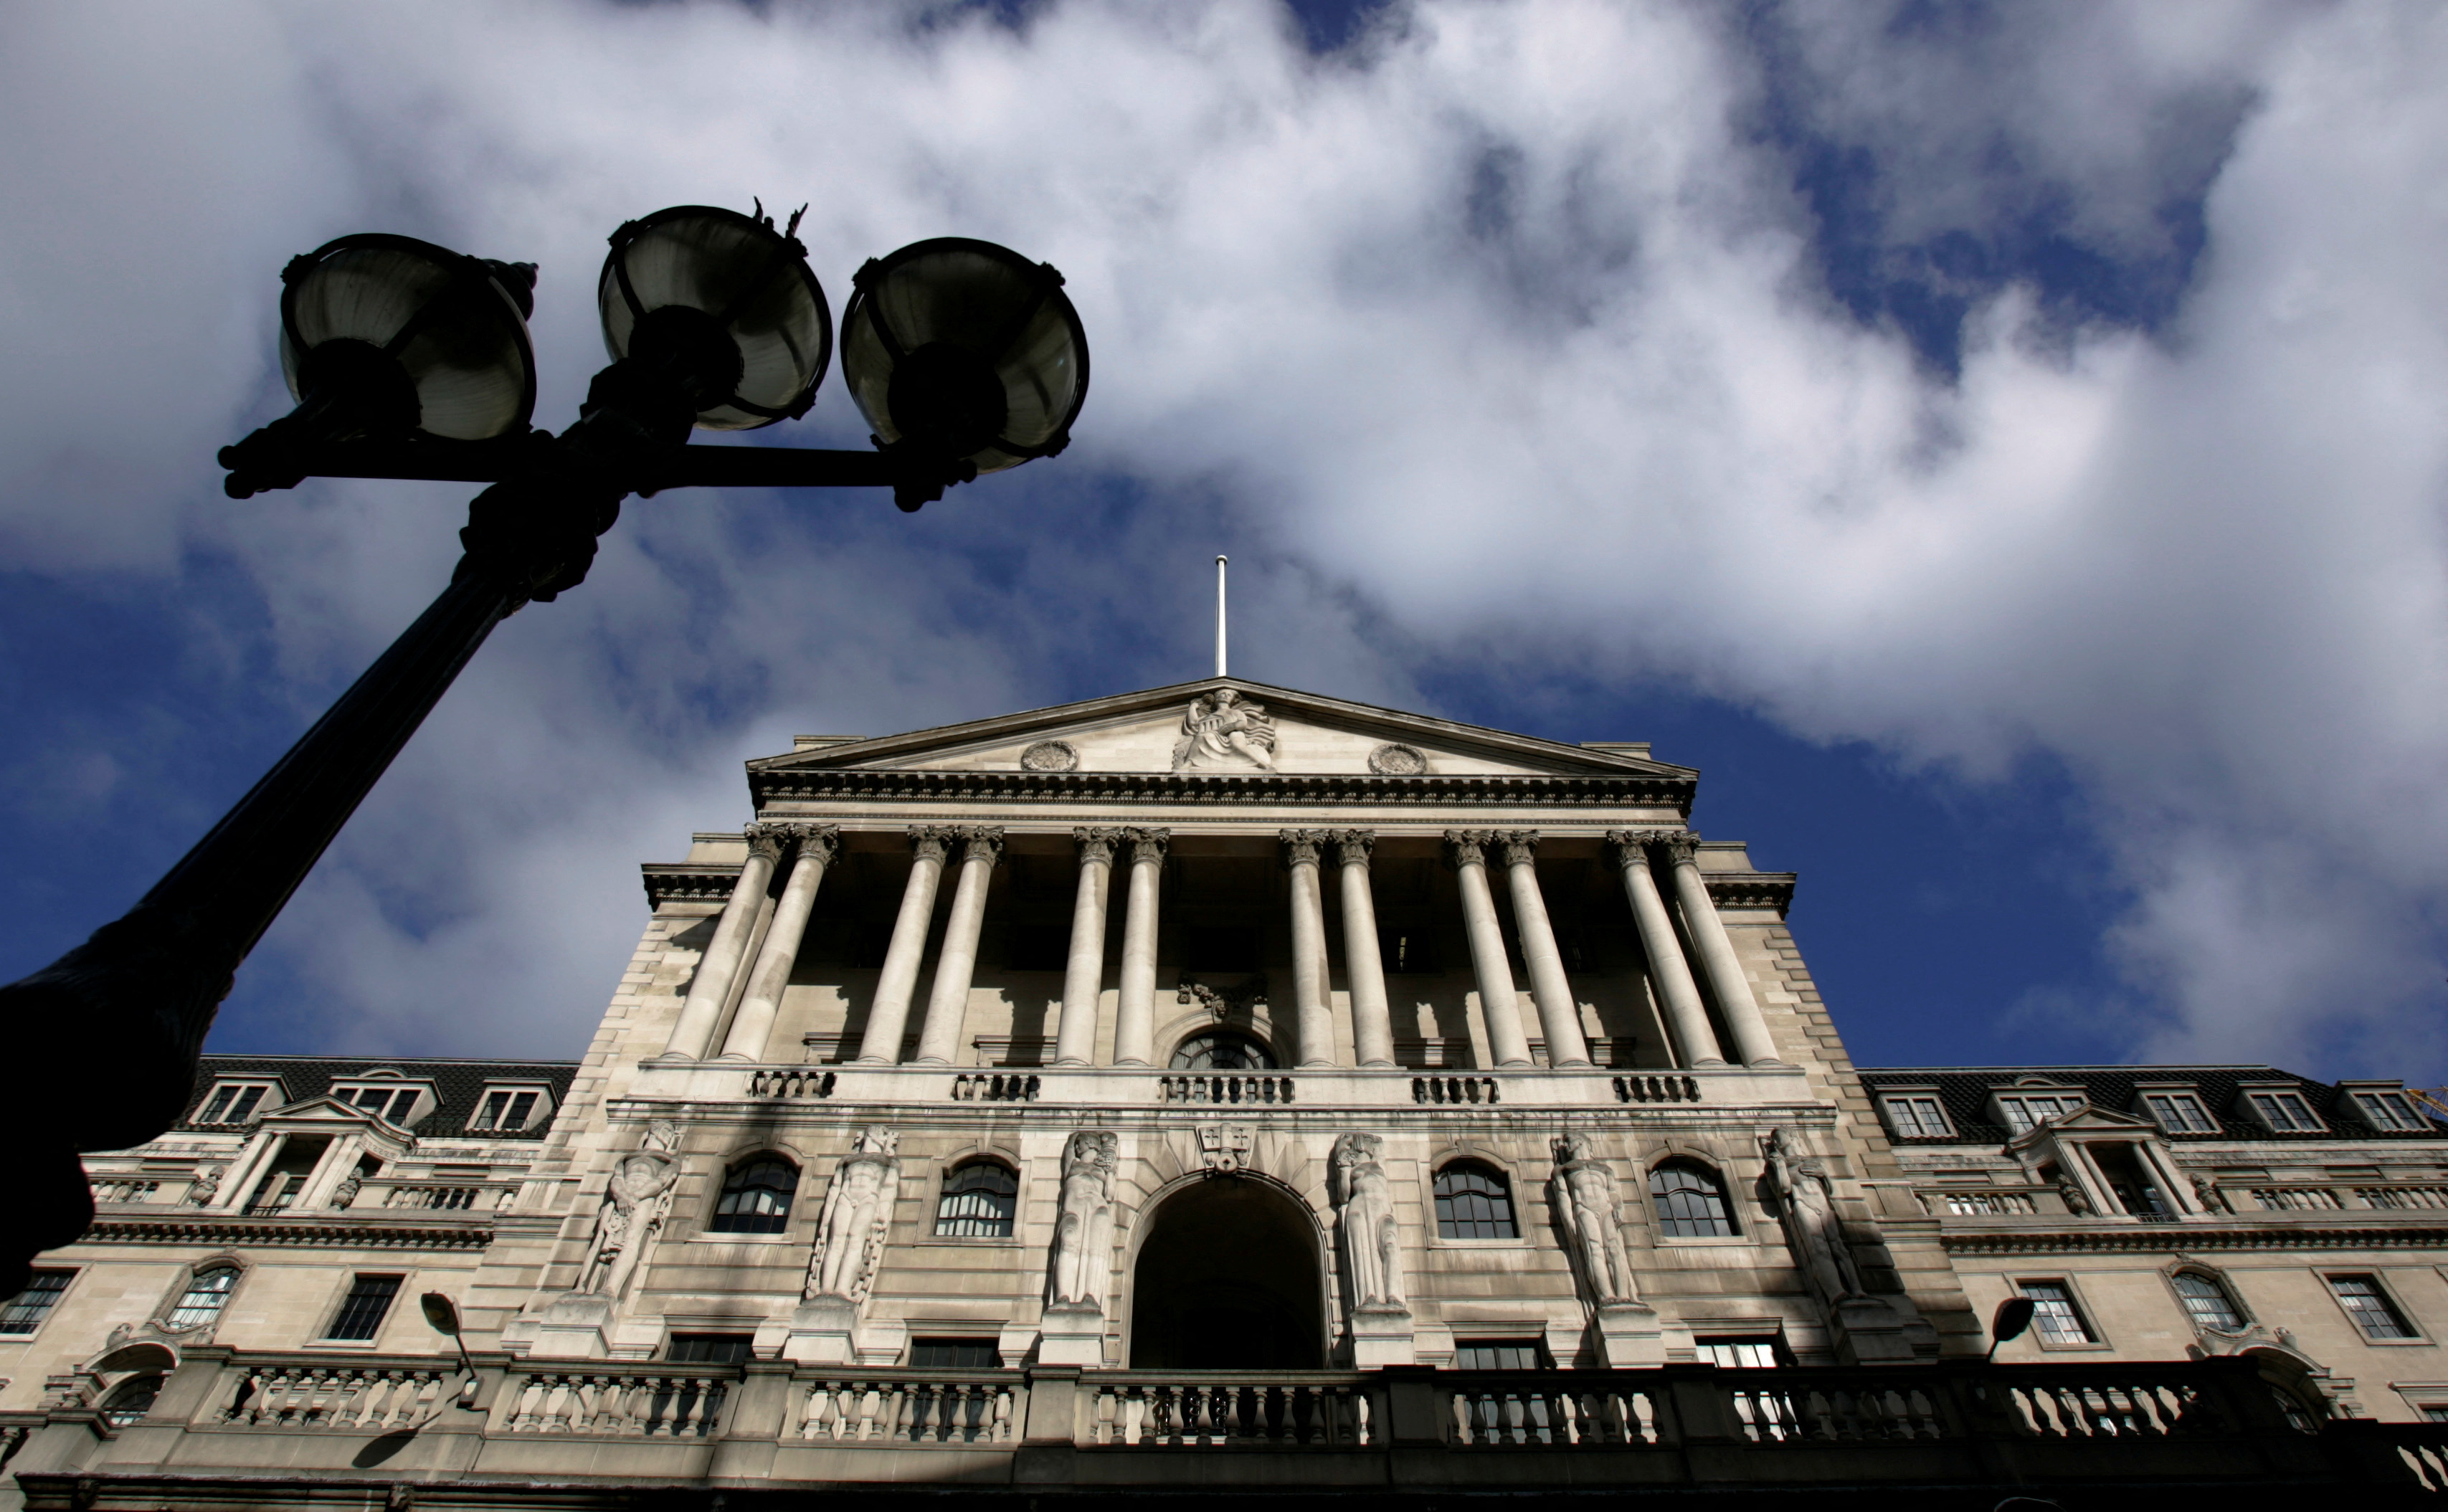 The Bank of England is seen in London